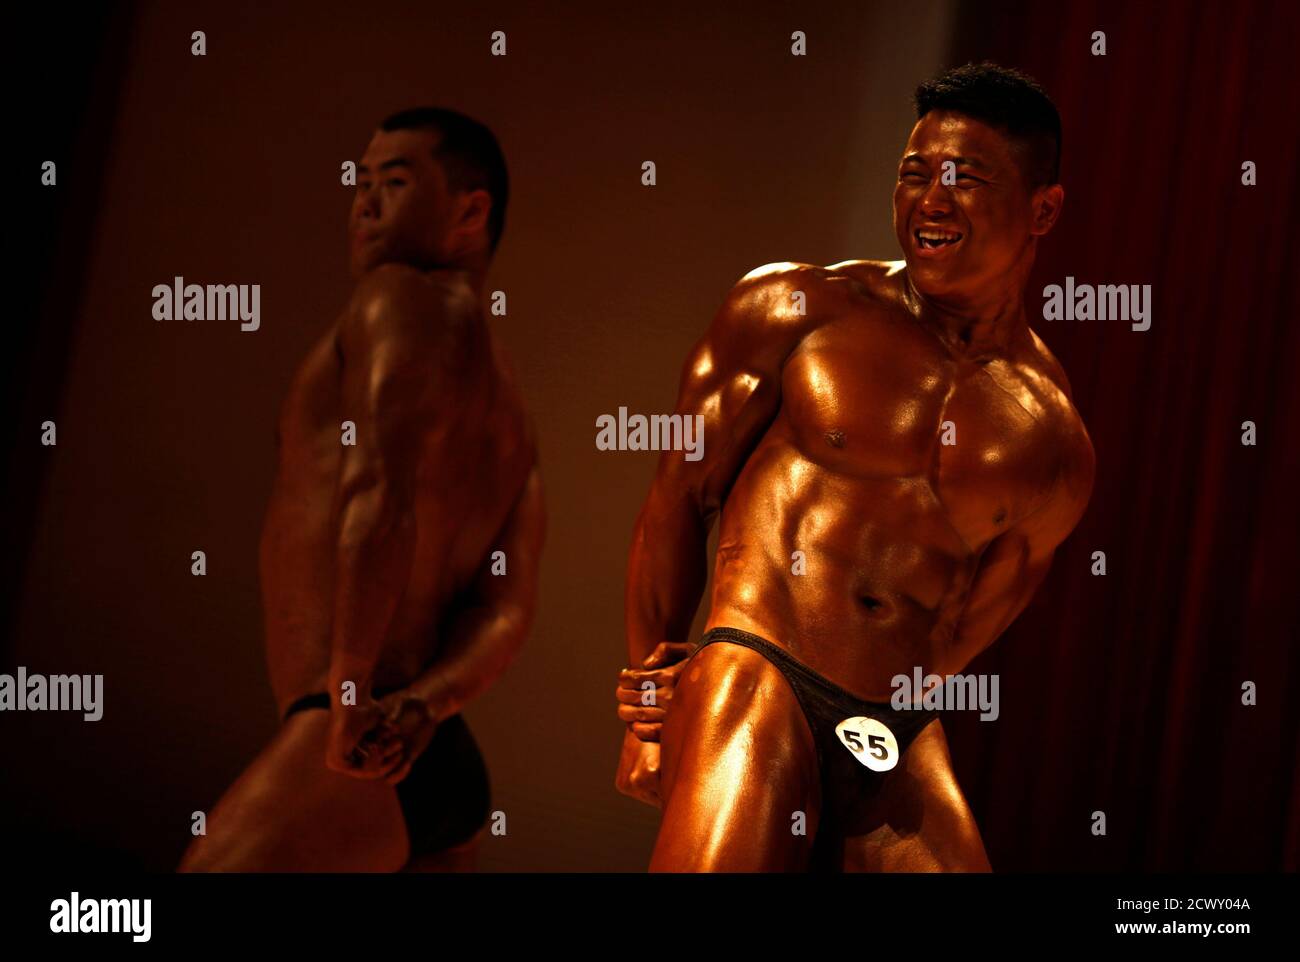 Participants compete in a bodybuilding competition in Shaoxing, Zhejiang province April 20, 2013. Amateur male and female bodybuilders from clubs around Shaoxing city competed in a one-day event to promote the sport. Categories range from 'Mr. Fitness man' to 'Grand Old man' -  for male participants over fifty years old. Every contestant to take first prize received a medal, diploma and 1000 rmb ($160) in cash.  REUTERS/Carlos Barria  (CHINA - Tags: SPORT SOCIETY) Stock Photo